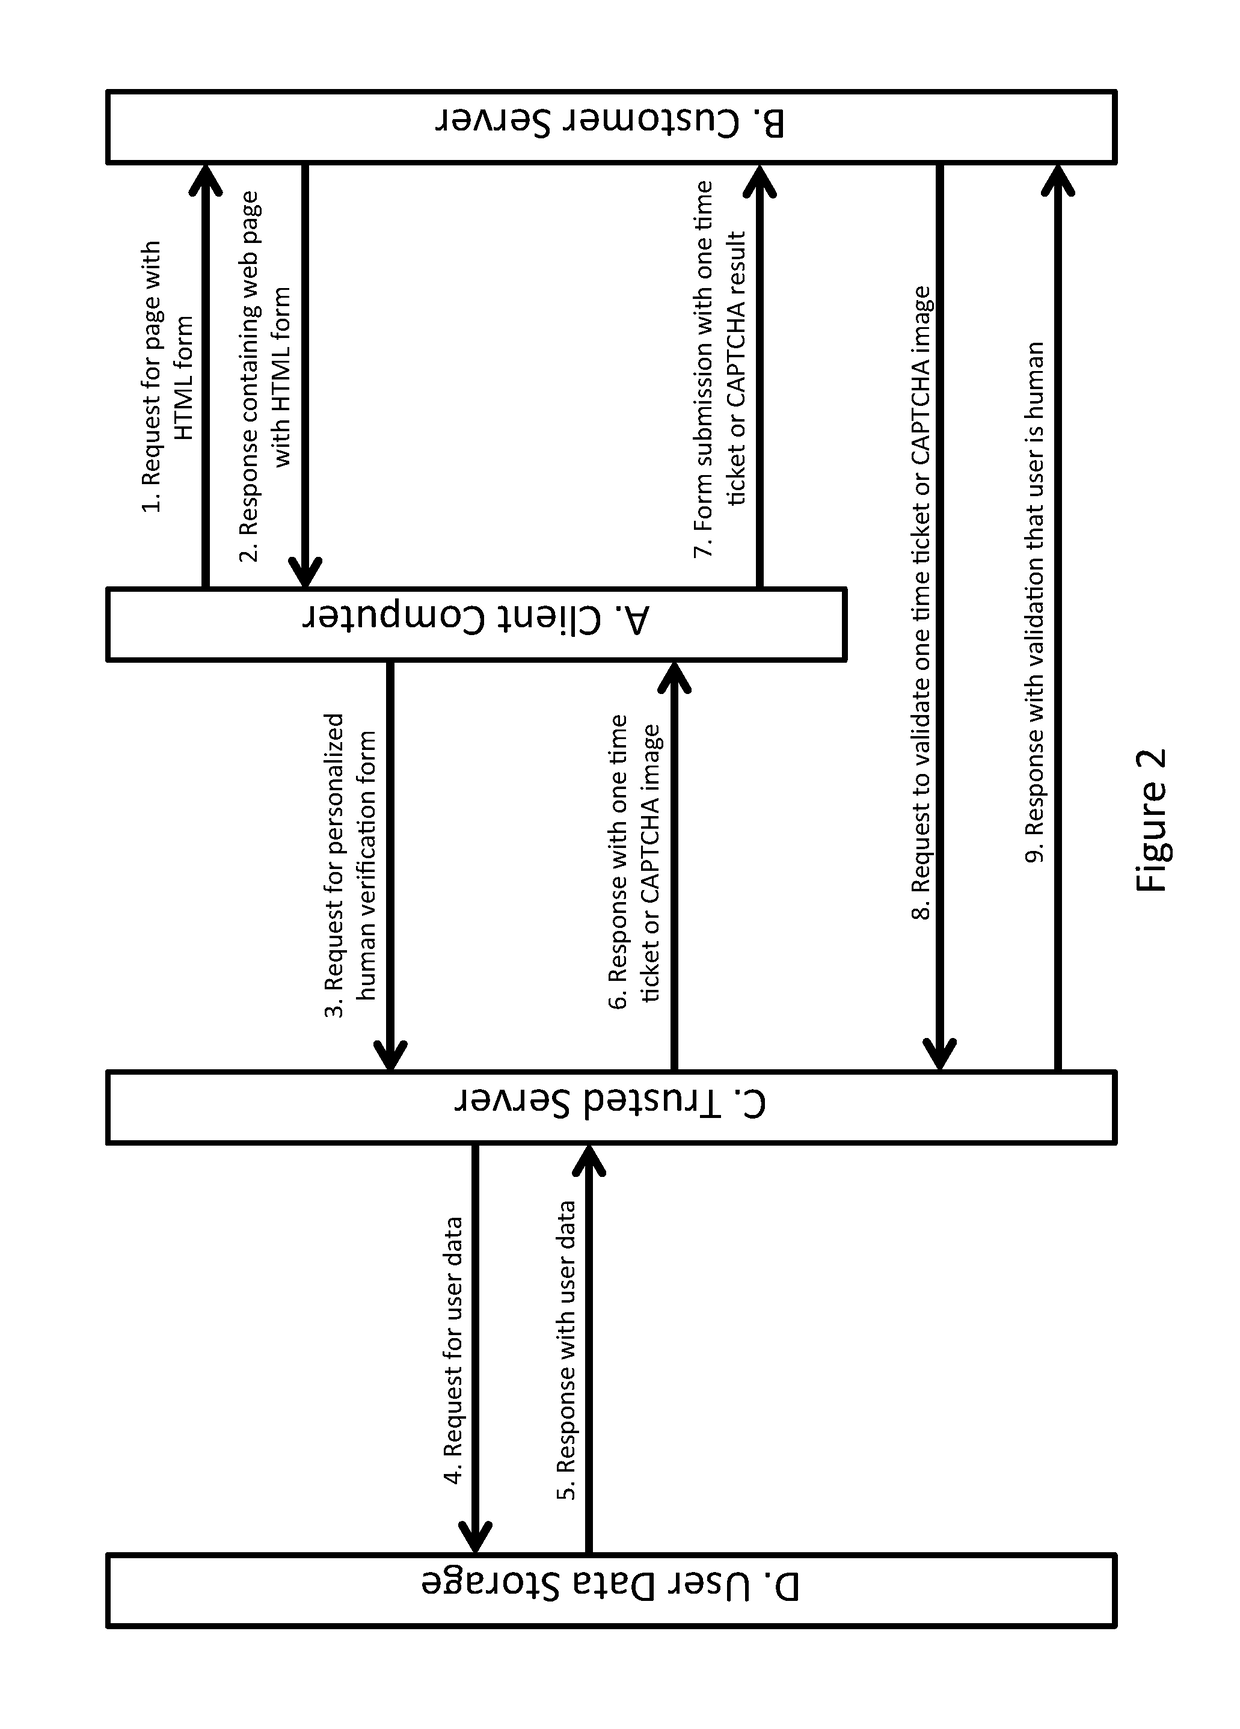 Systems and methods for determining whether user is human